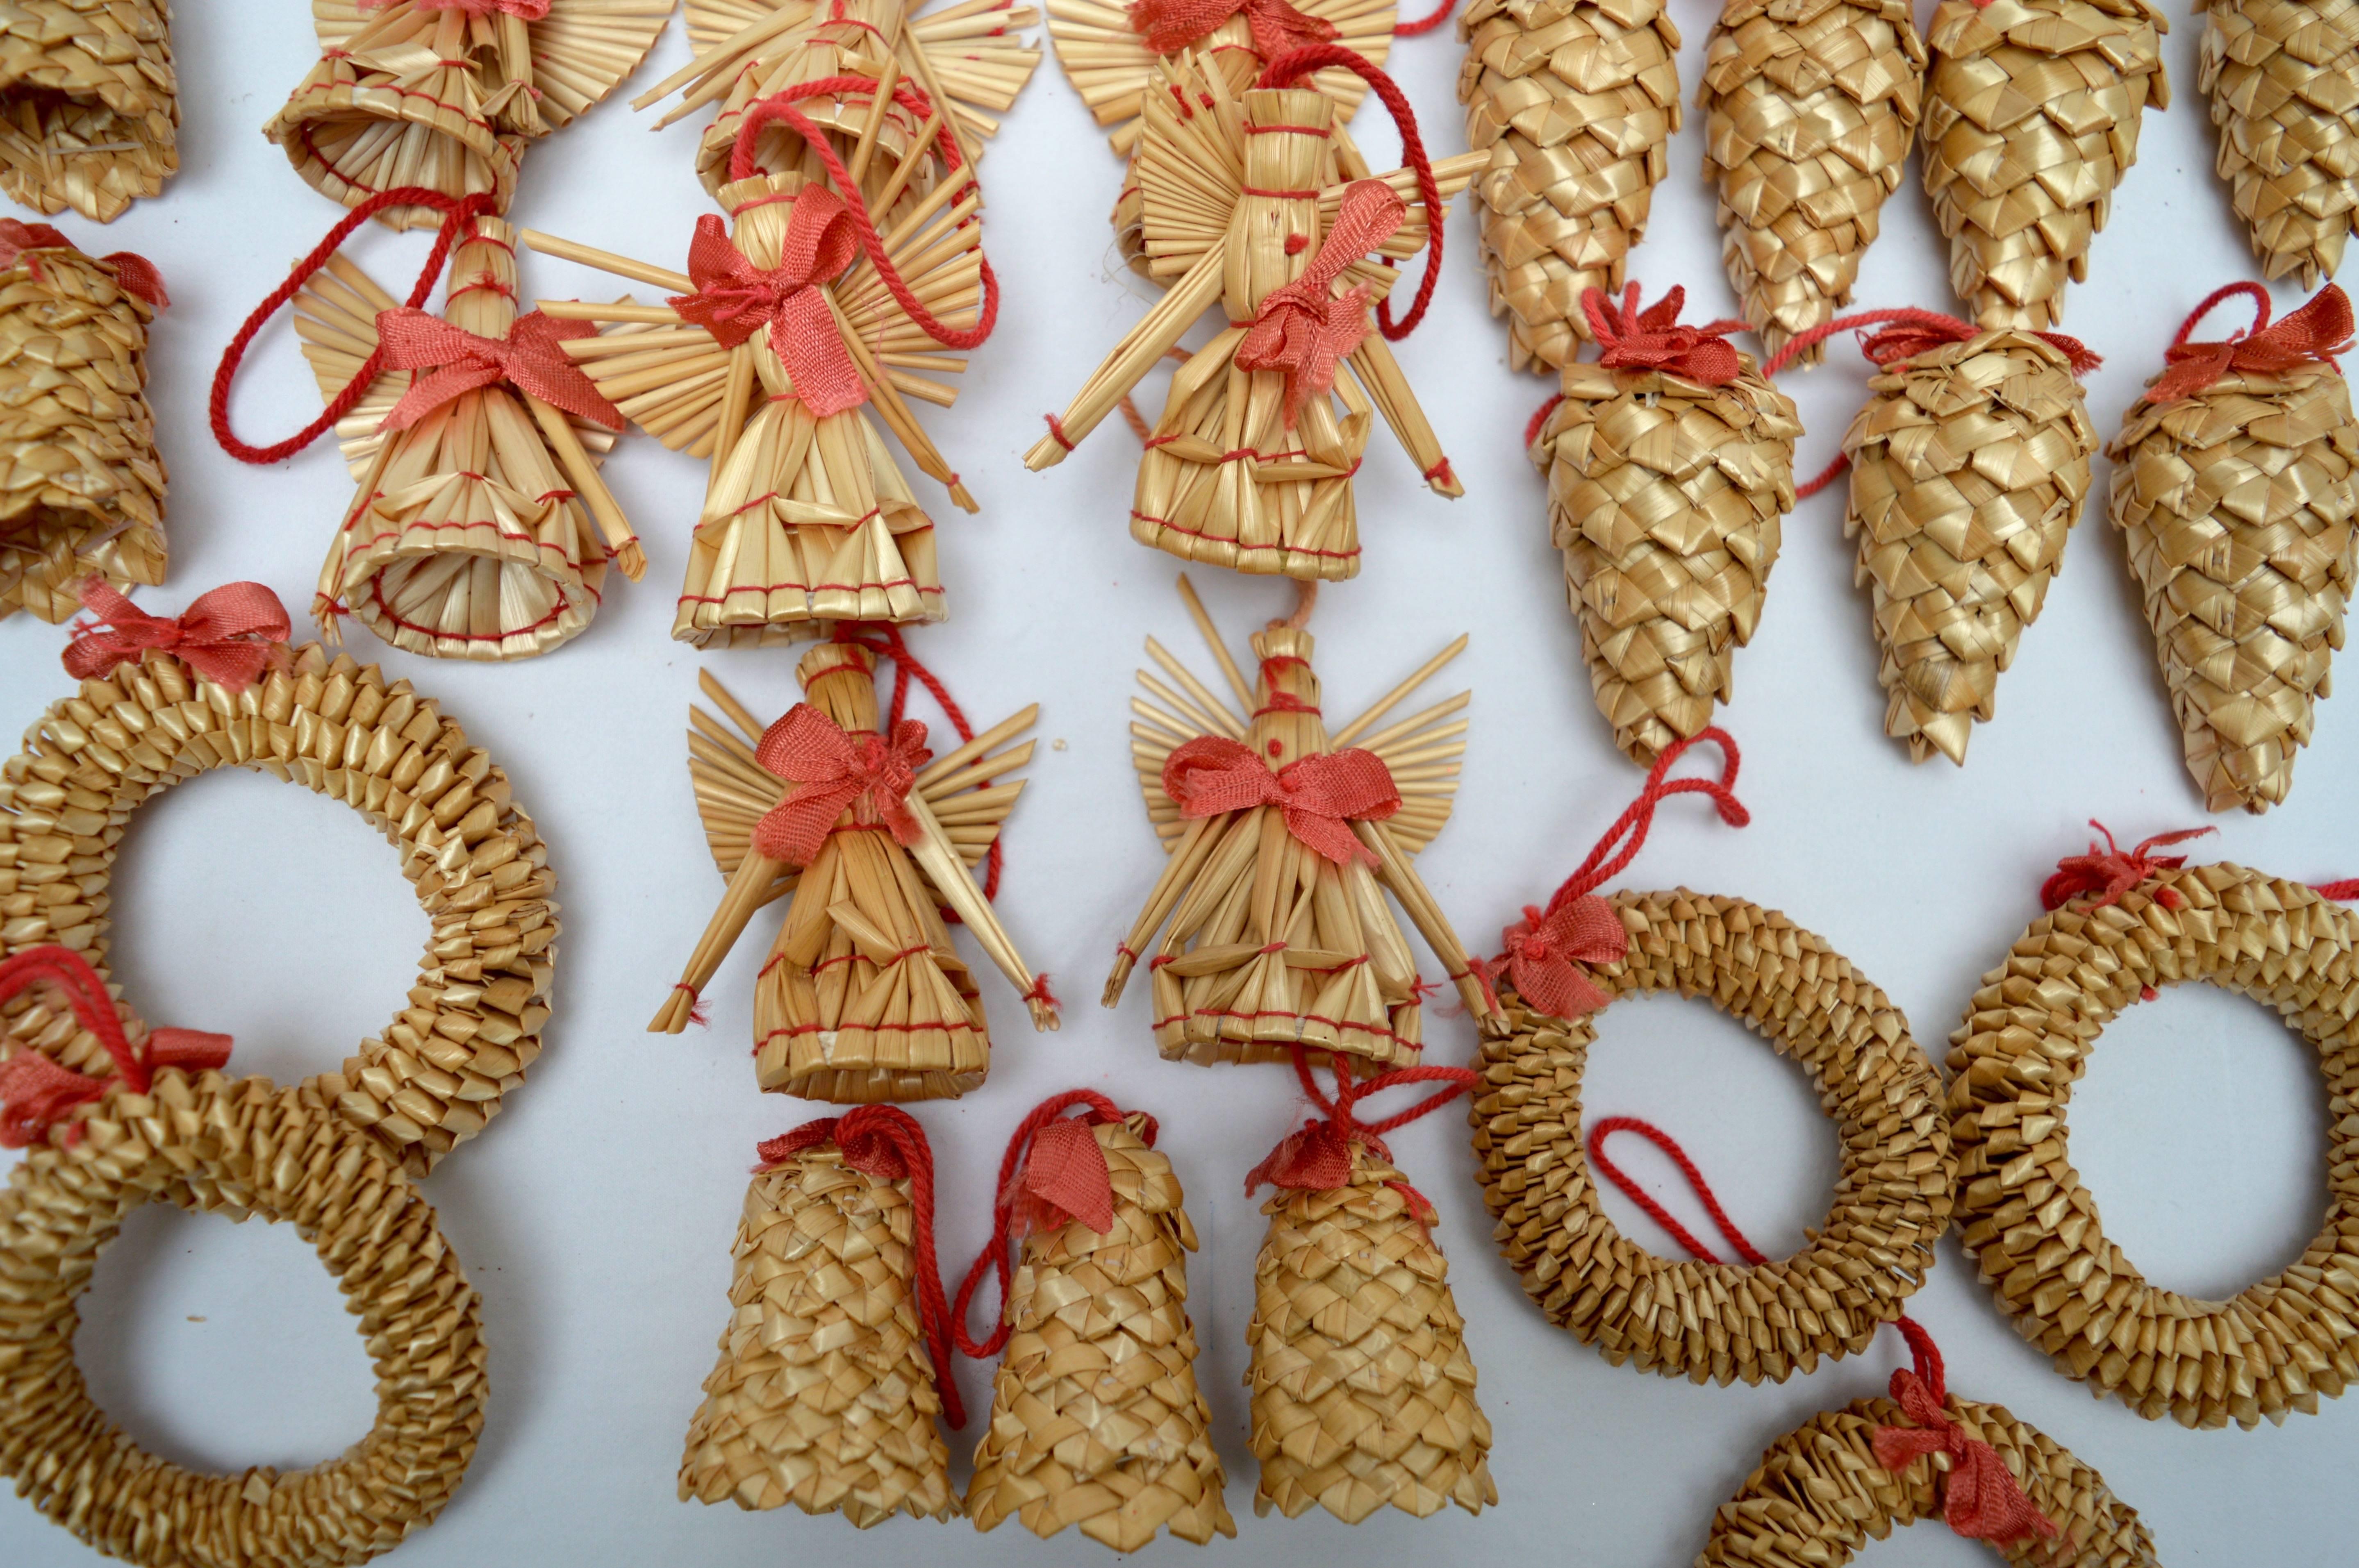 A collection of 37 vintage Swedish handwoven straw Christmas ornaments. Mid-20th century and all in excellent condition.
12 bells.
5 wreaths.
10 pinecones.
10 angels.